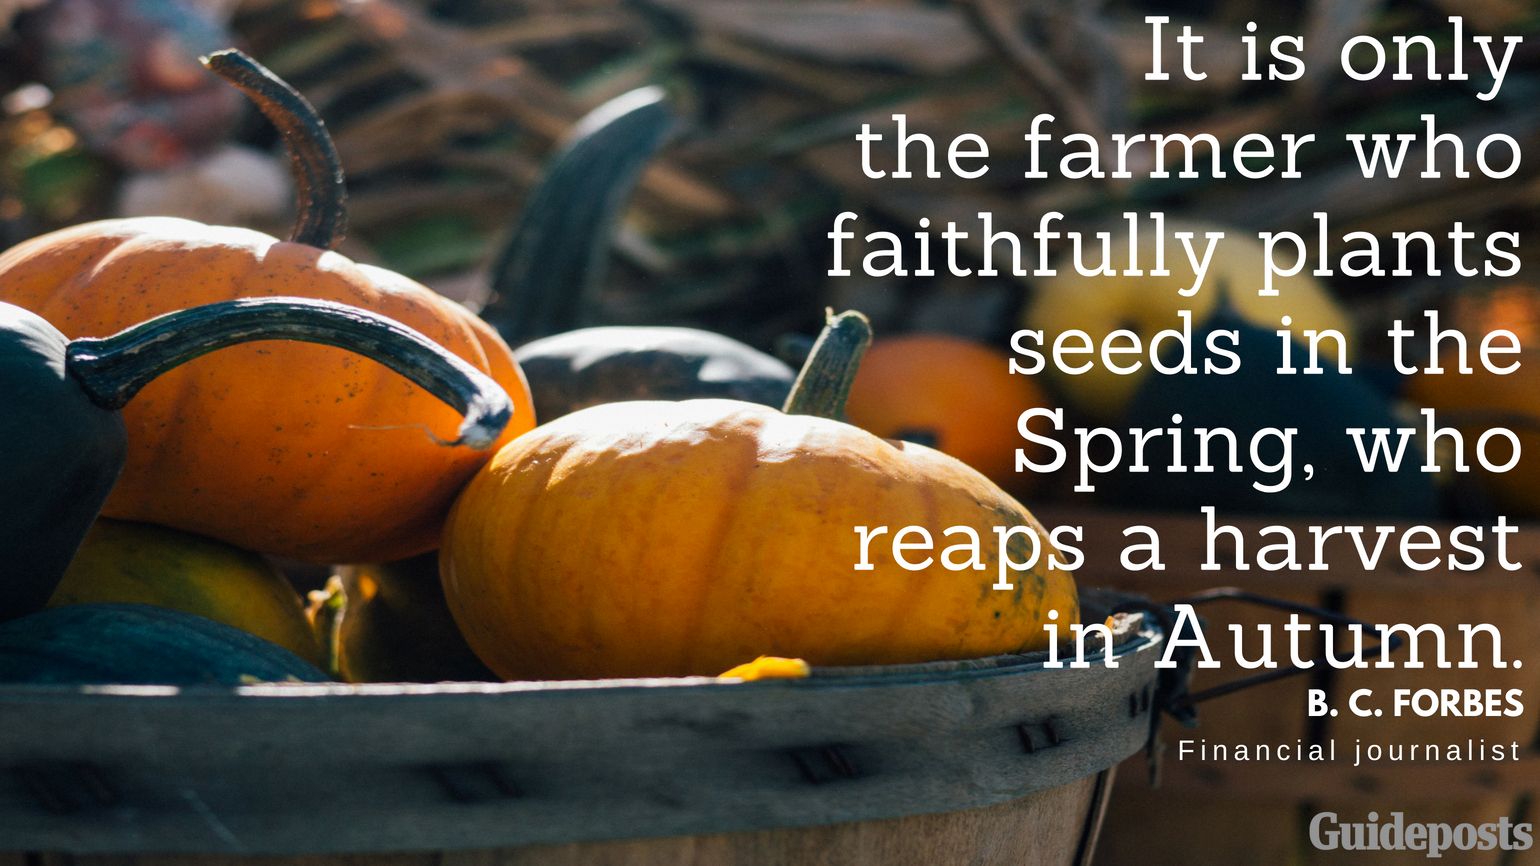 It is only the farmer who faithfully plants seeds in the Spring, who reaps a harvest in Autumn. —B. C. Forbes